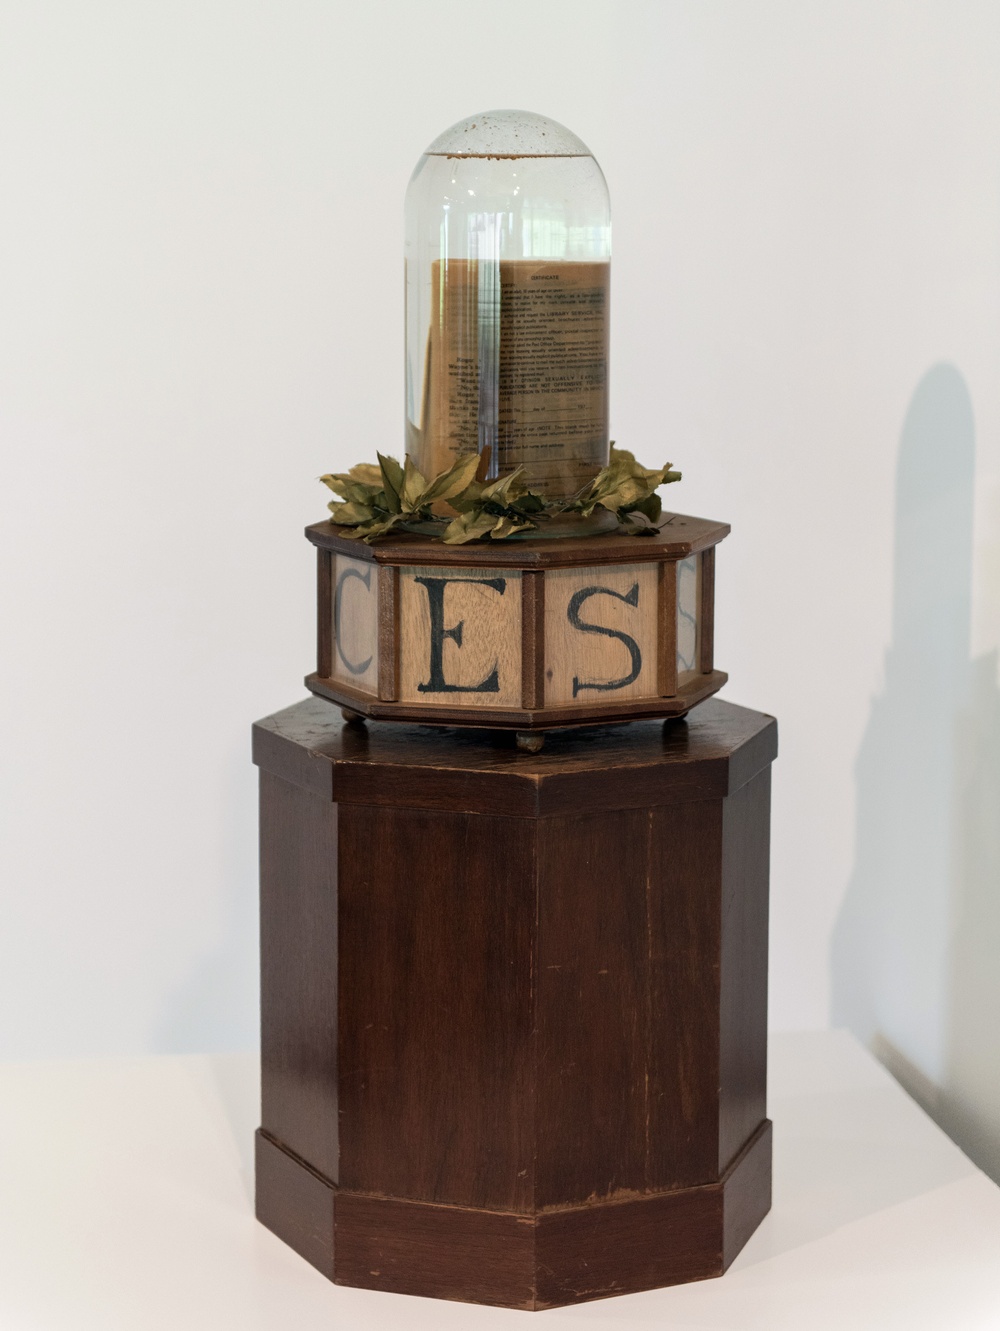 A book submerged in water inside a dome-shaped terrarium is situated on top of a laurel wreath and an octagonal, wooden base with letters  C, E, S